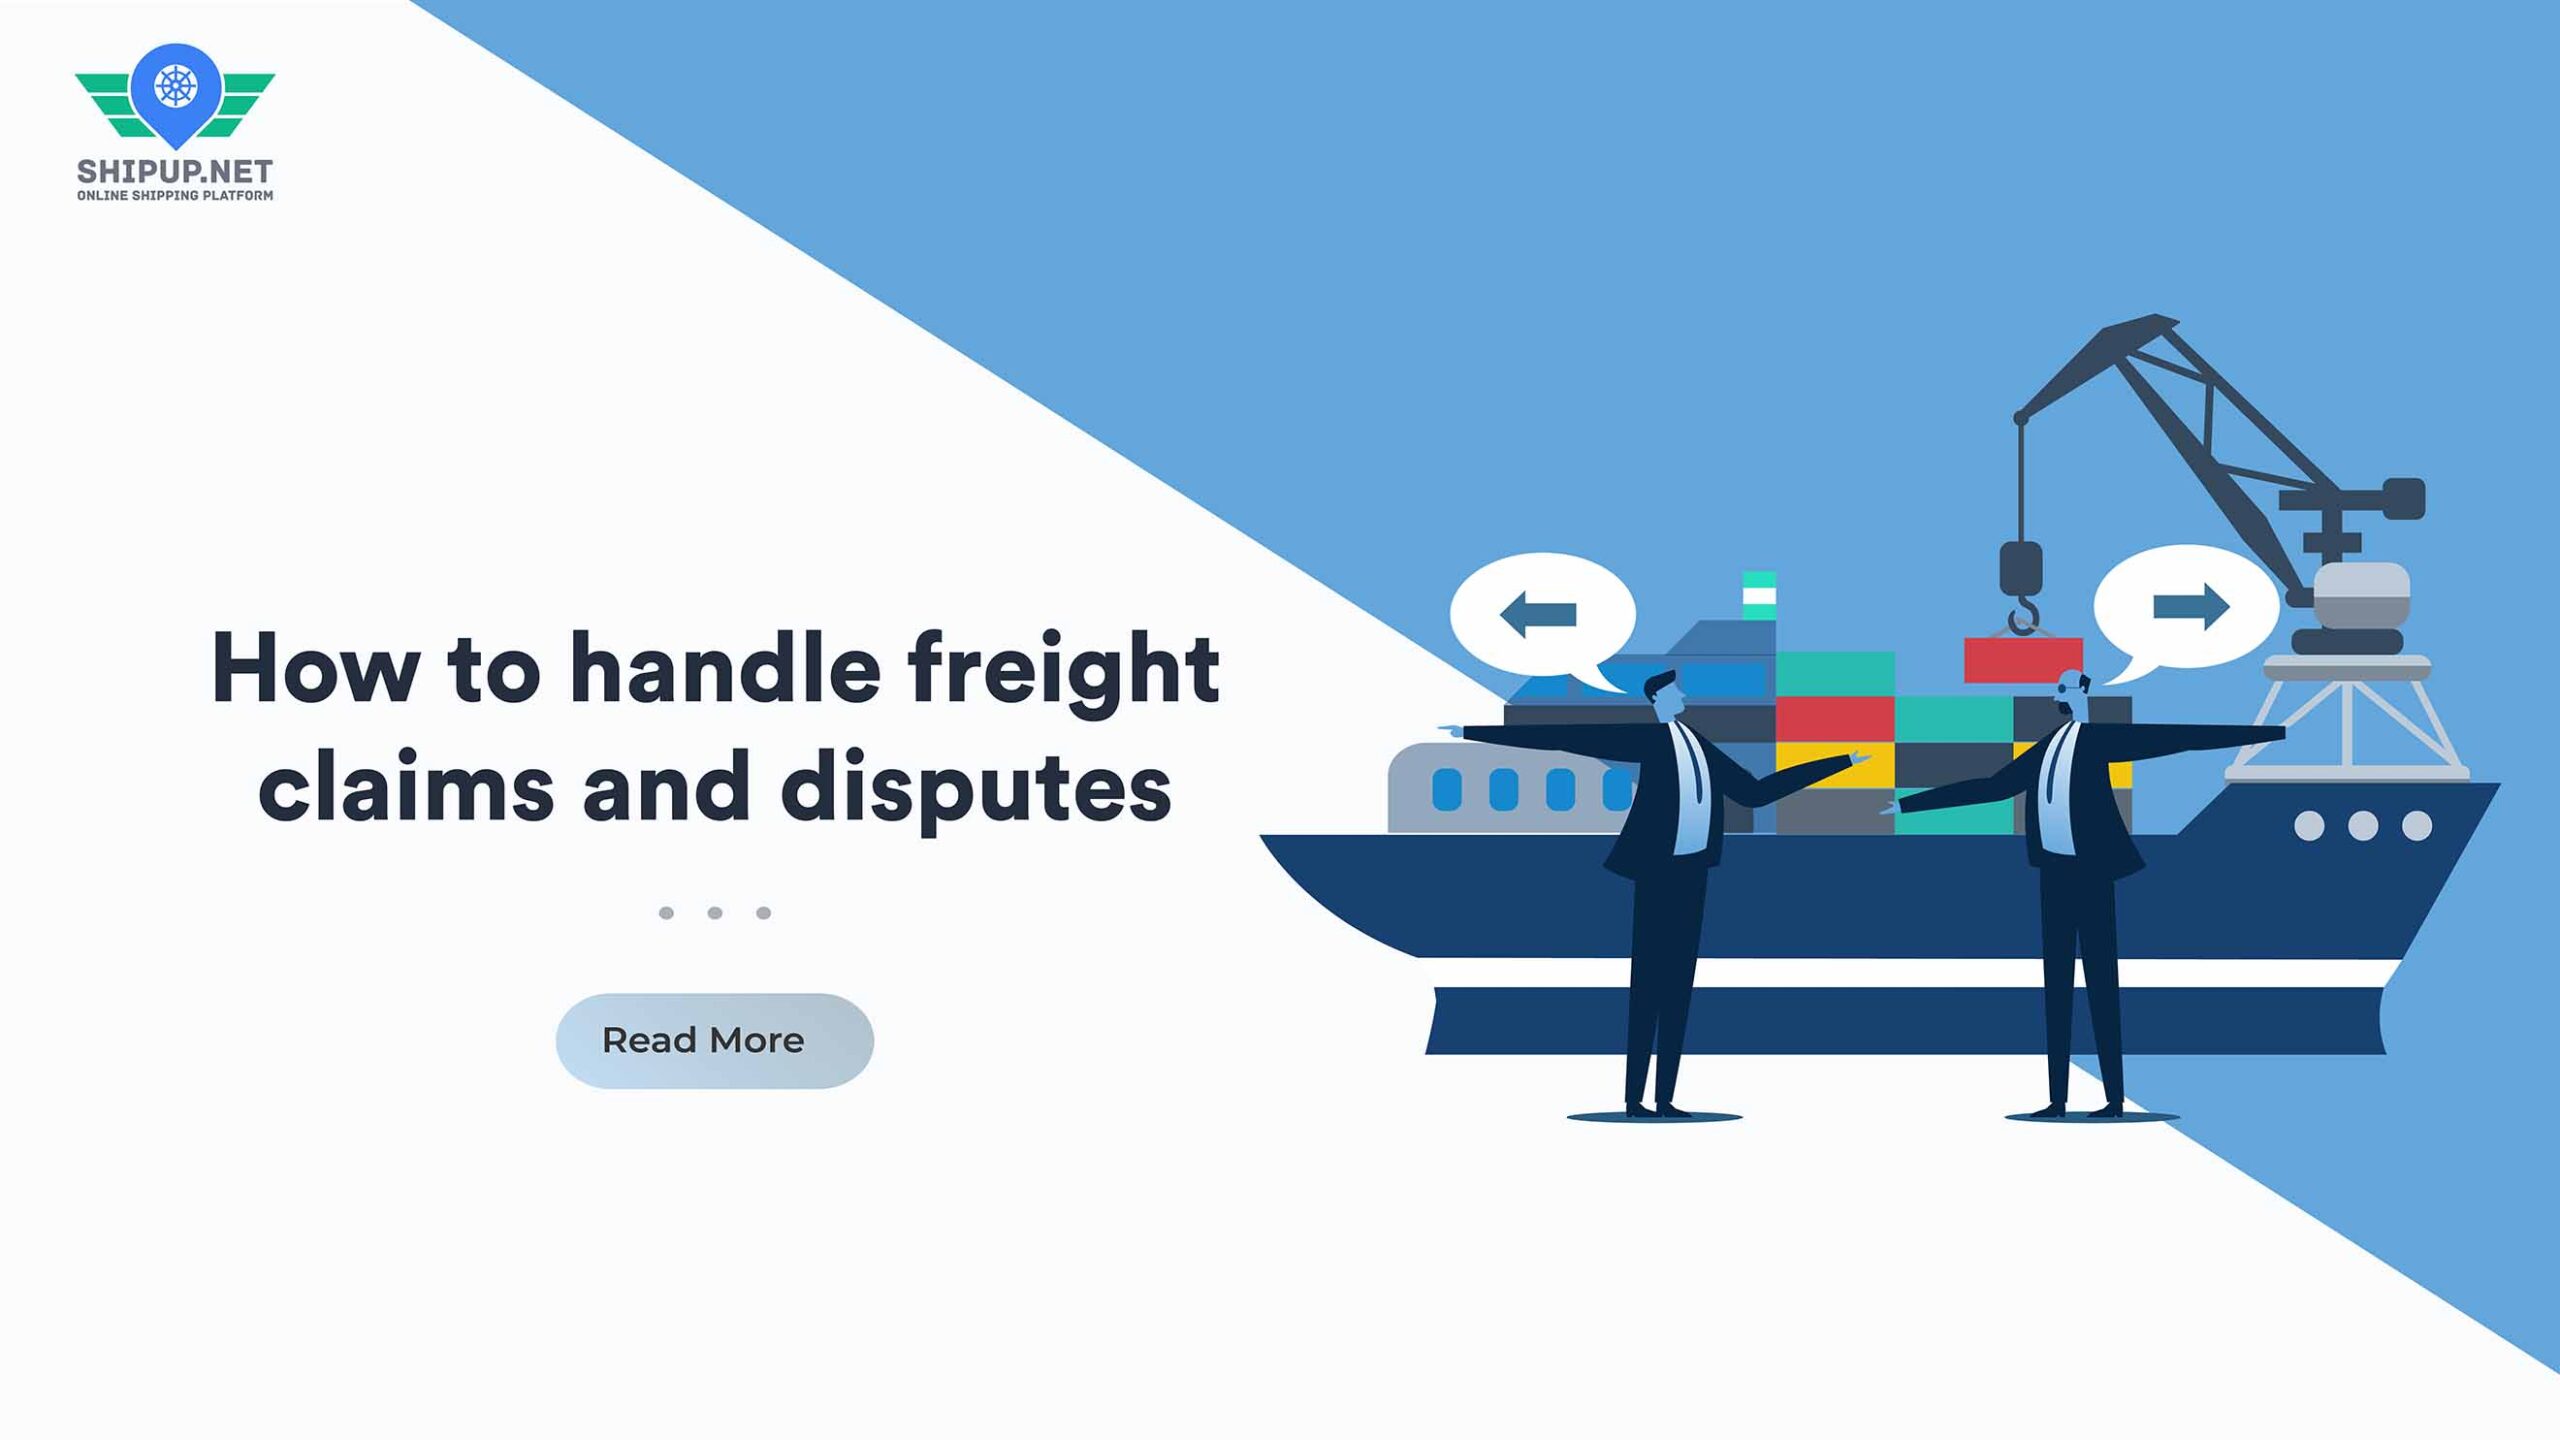 How to handle freight claims and disputes